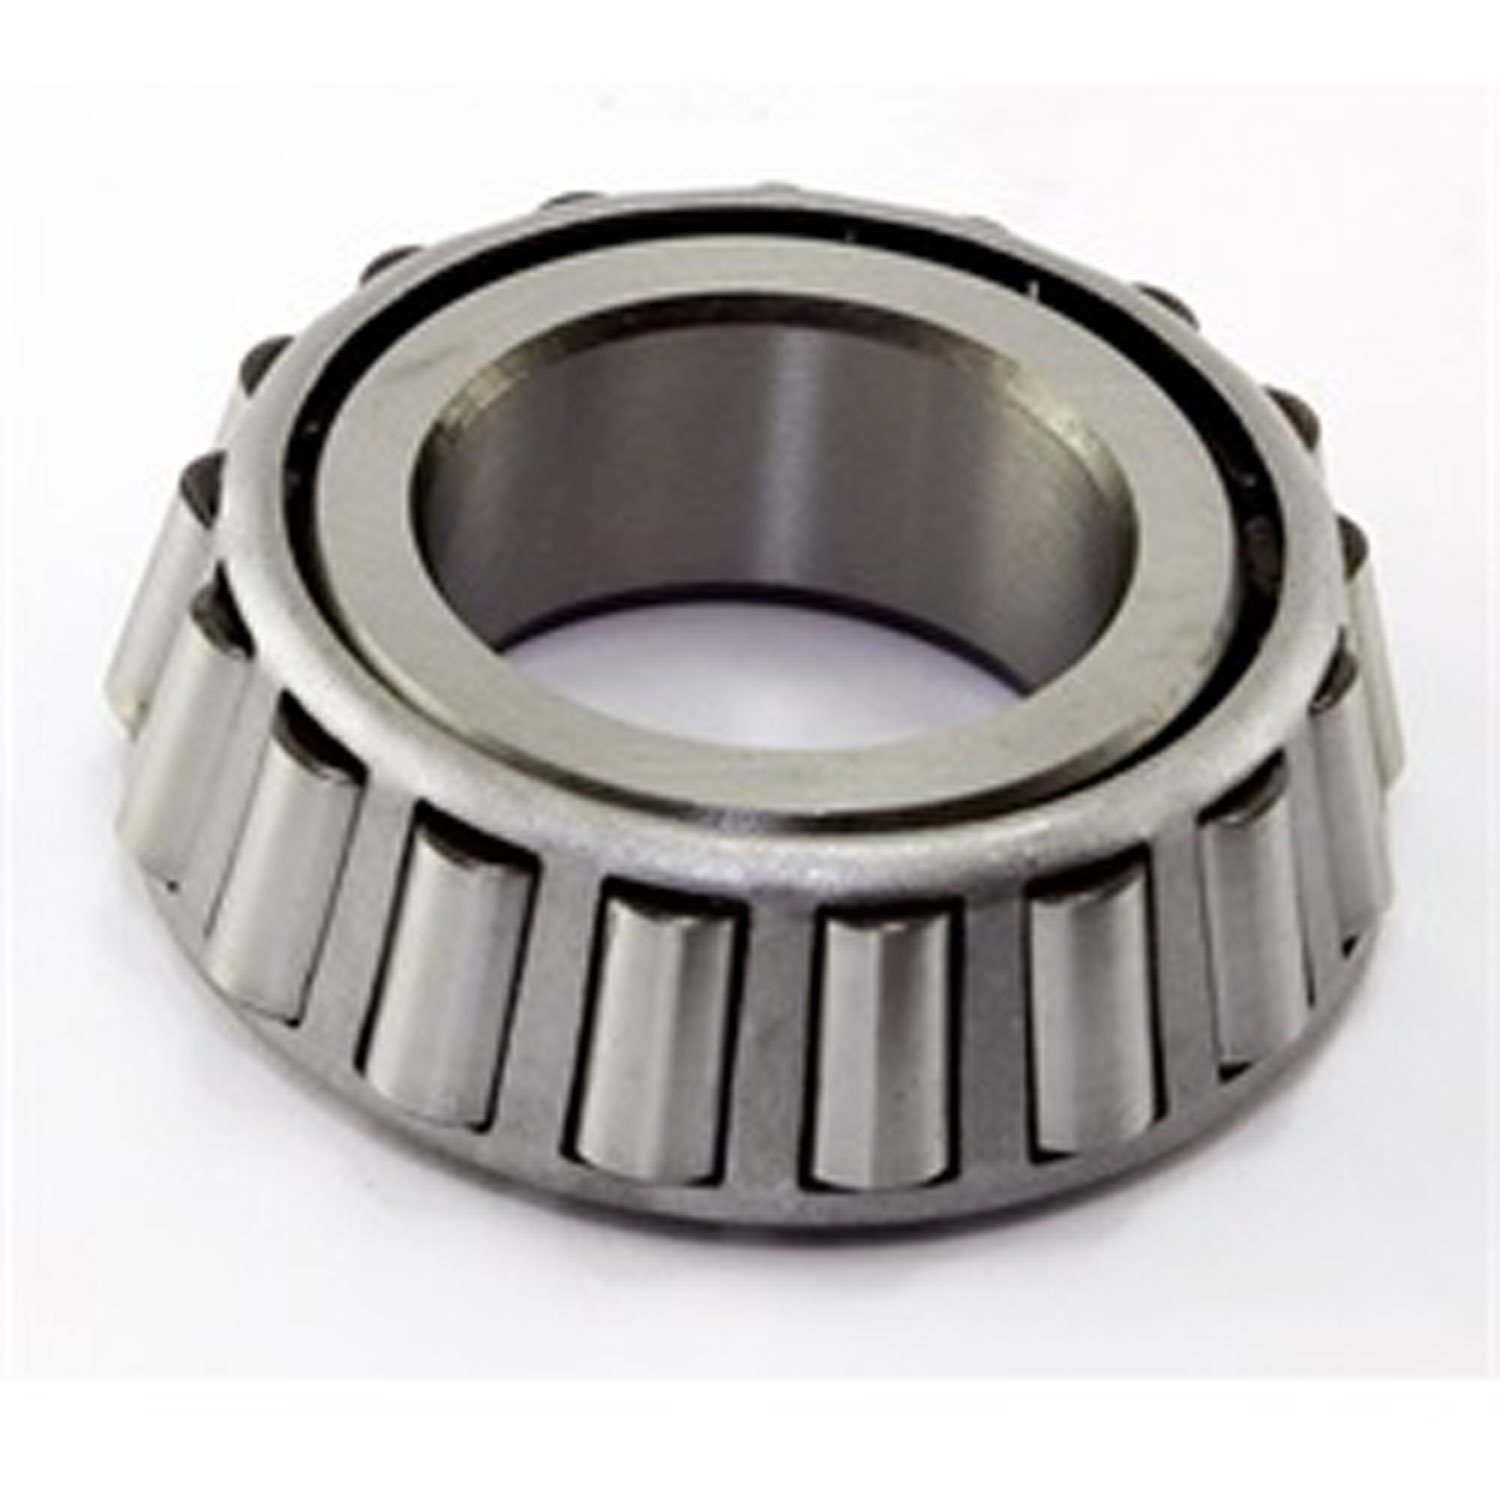 This rear outer wheel bearing cone from Omix-ADA fits 48-50 Willys VJ Jeepsters and 47-56 2WD station wagons.